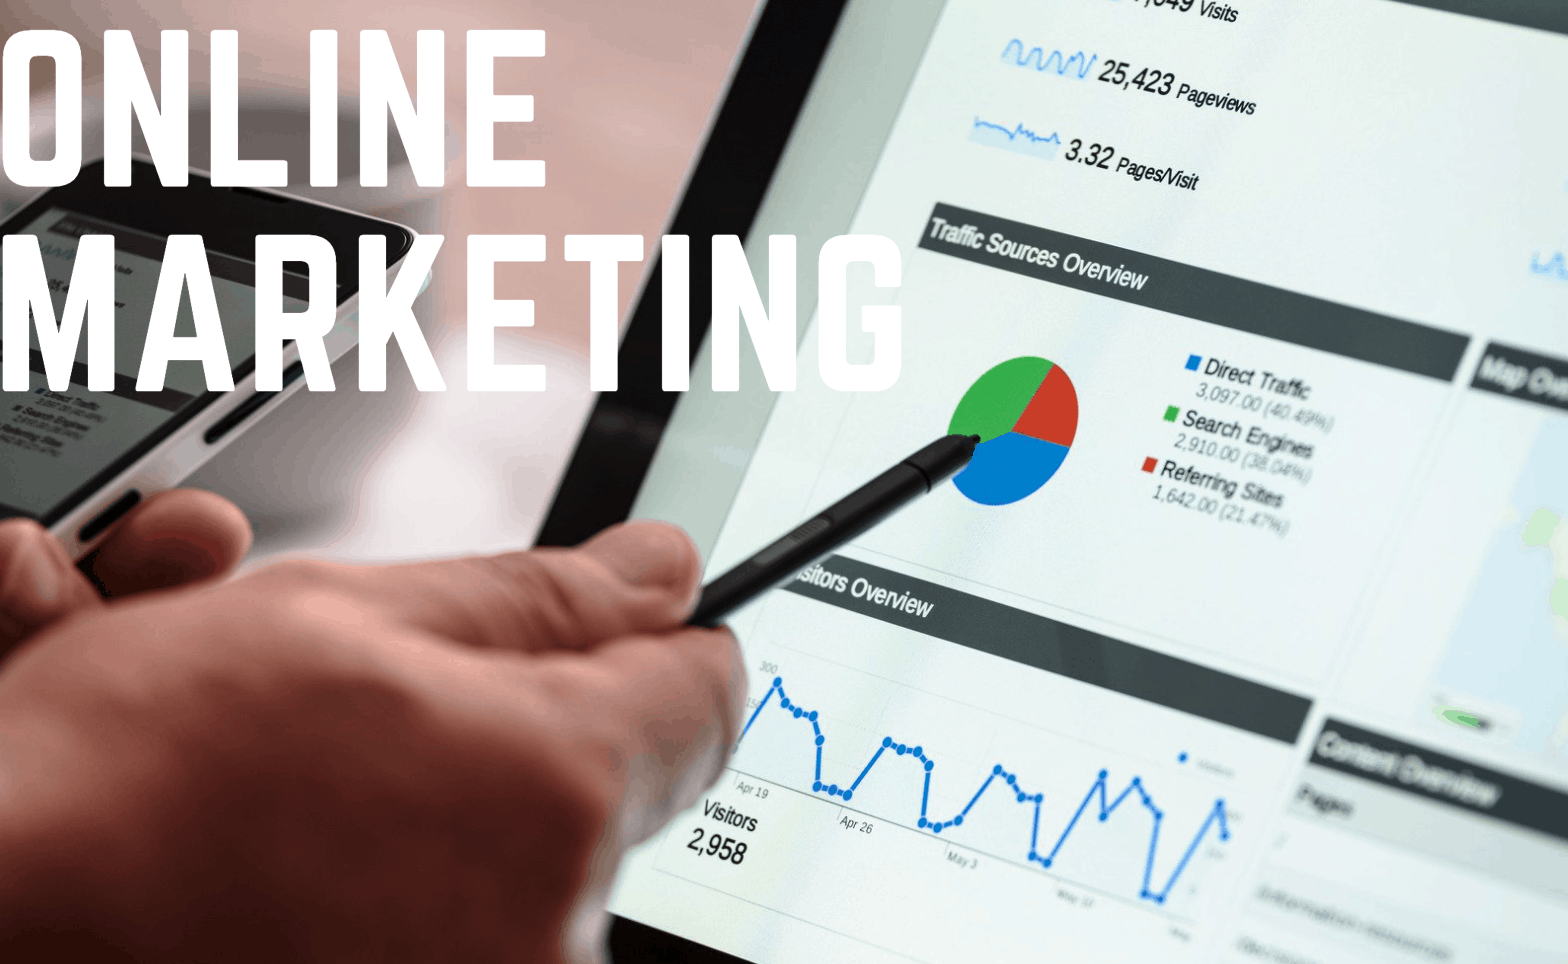 Online marketing for accountants